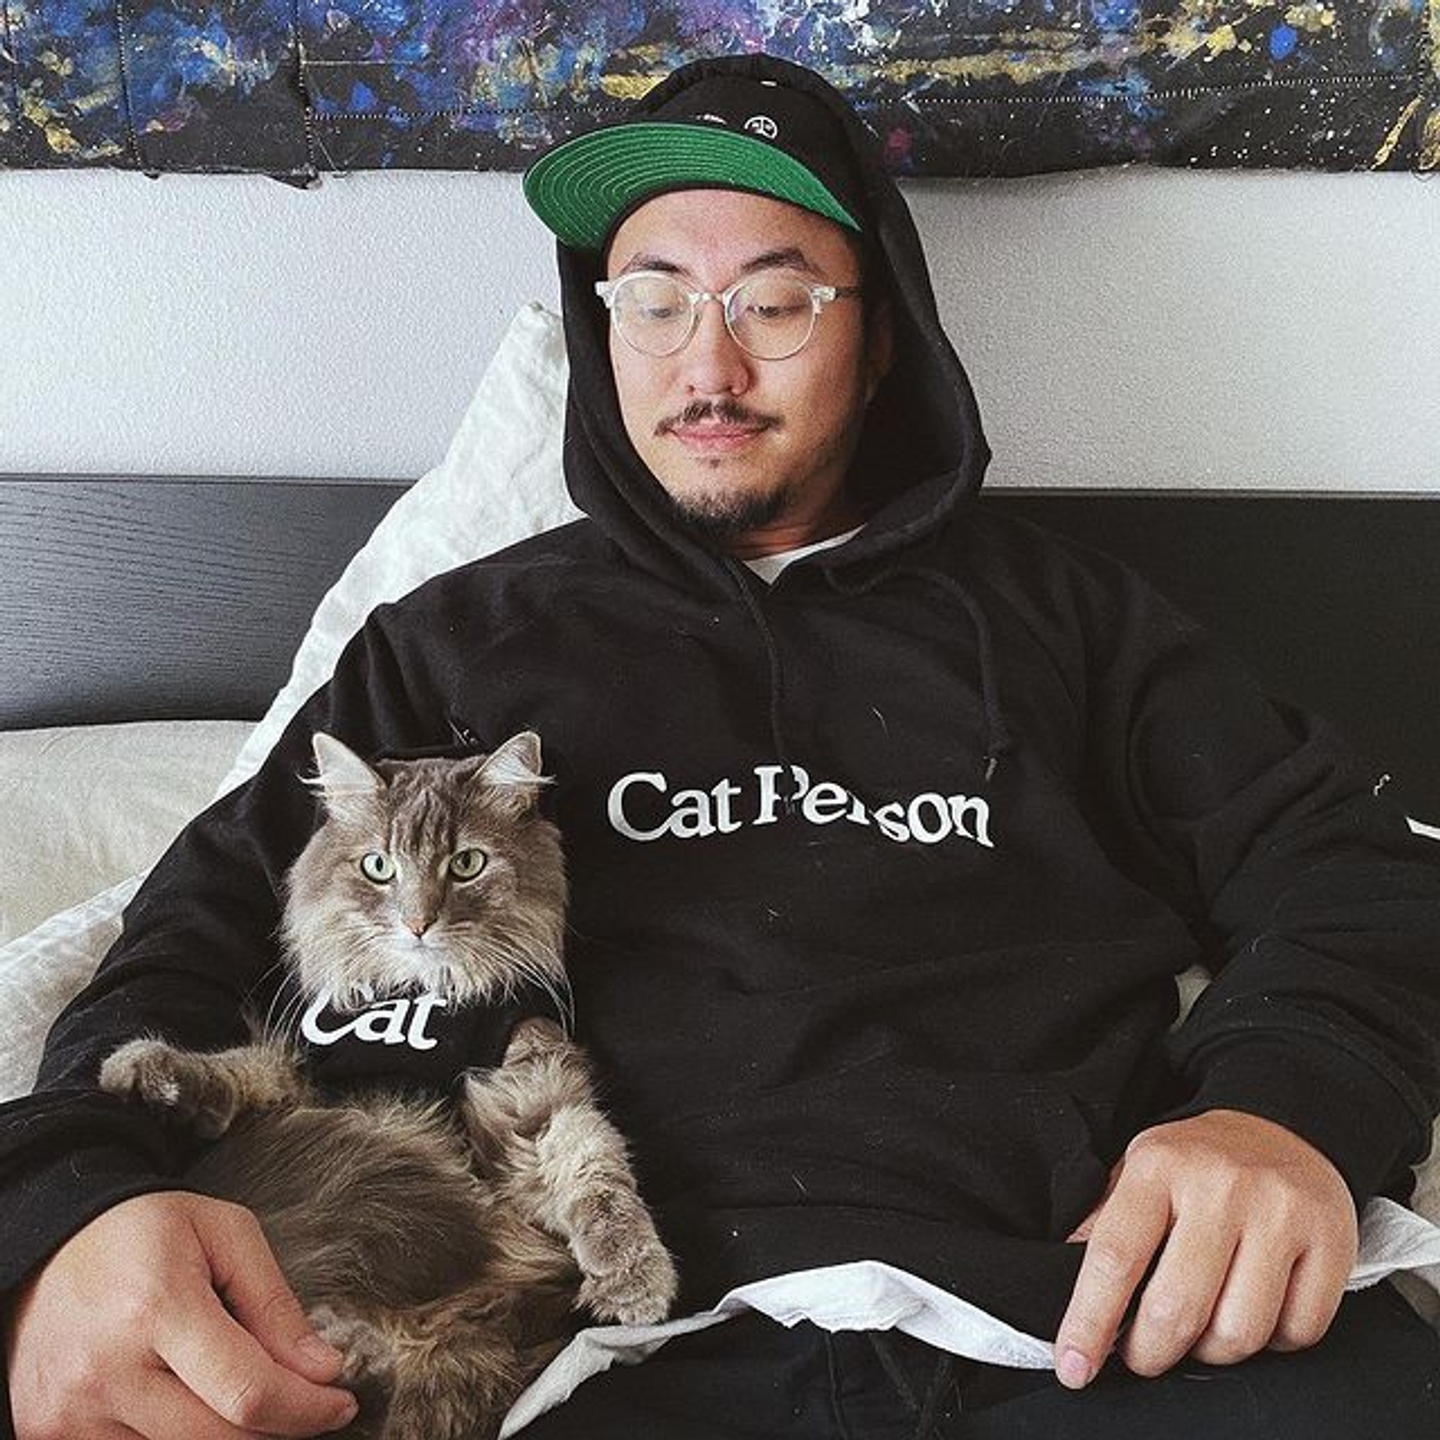 Man wearing Cat Person hoodie looking at cat wearing a cat shirt